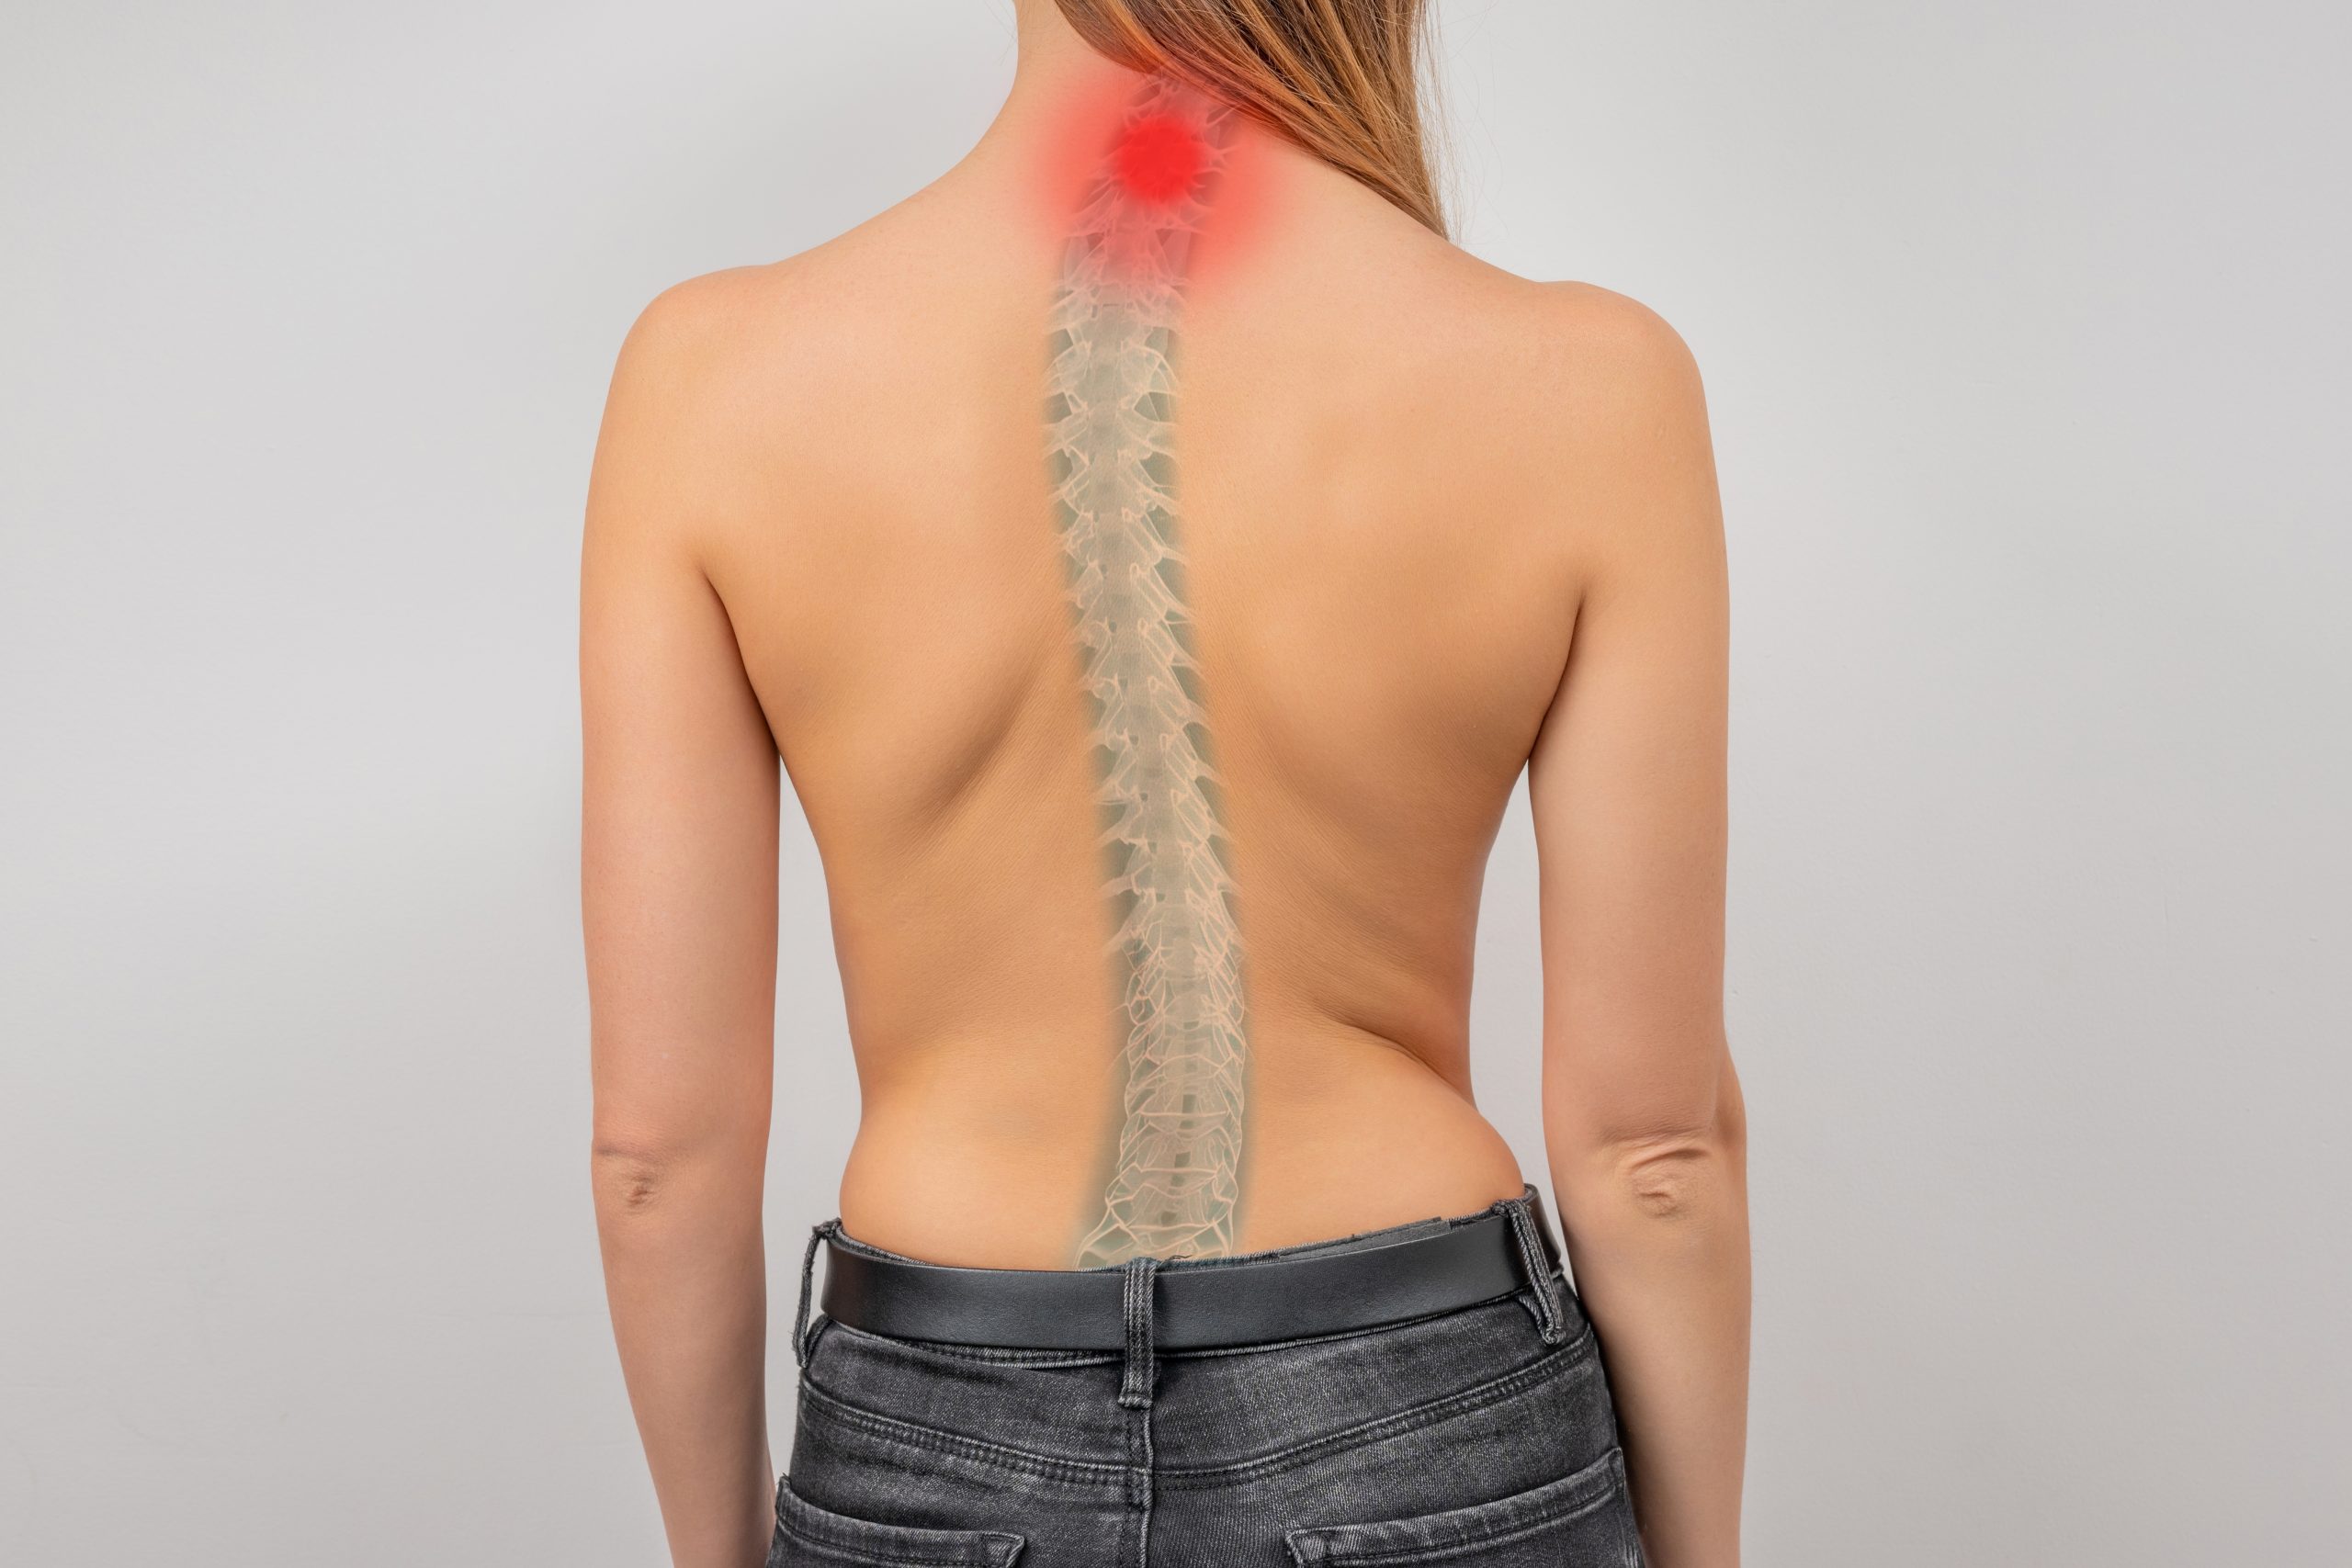 Cervical Lordosis Chiropractic Treatment Near Bothell-Mill Creek, WA